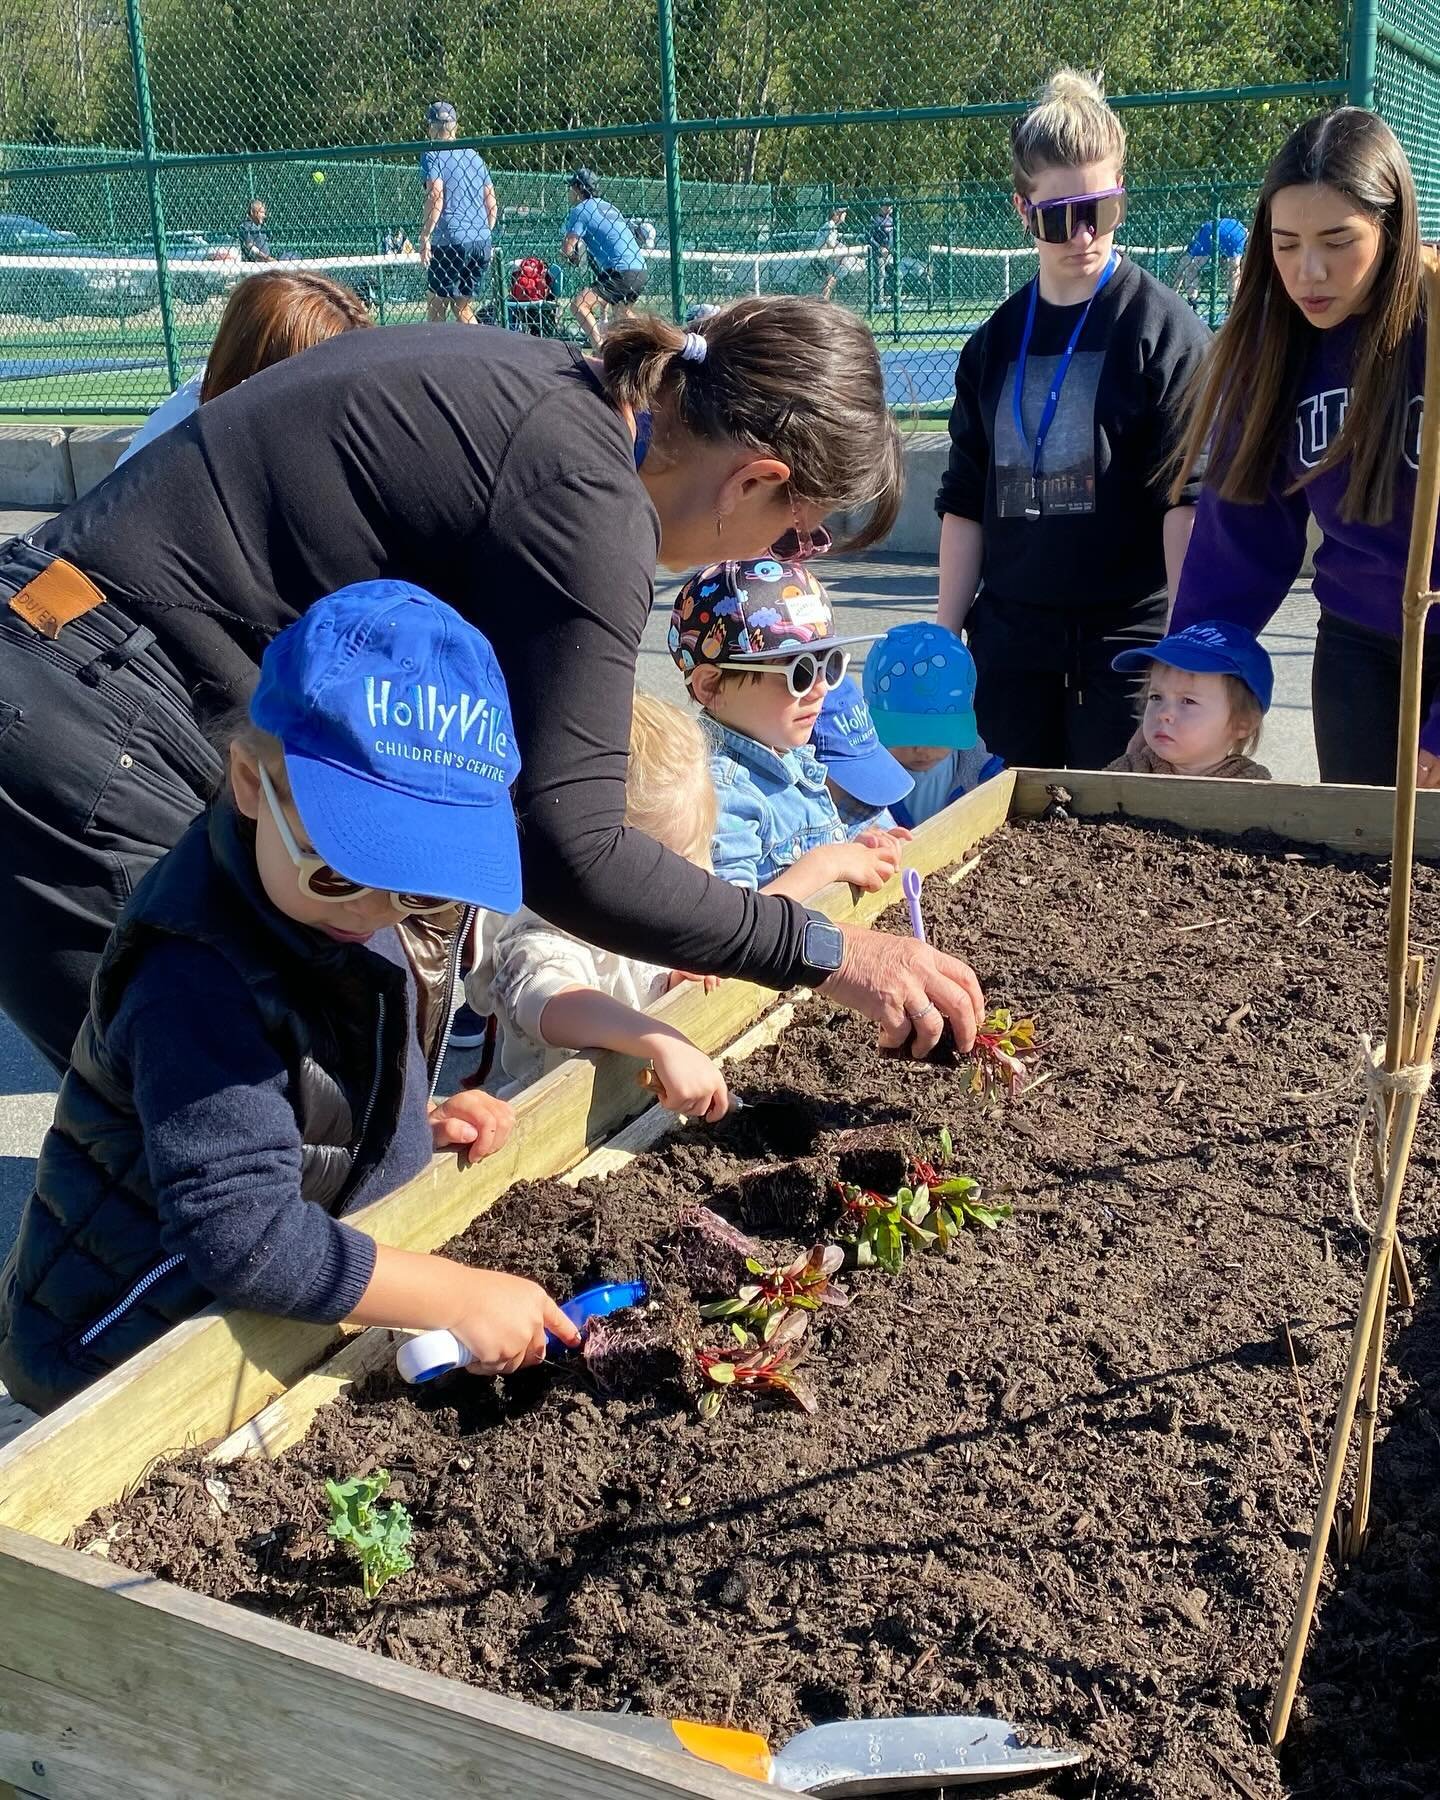 This earth day our Mini Members learned how to garden and plant their own vegetables! 
.
.
#happyearthday #earthday #hollyburncountryclub #countryclub #hollyburn #westvancouver #hcc #aclubforlife #minischolars #gardening